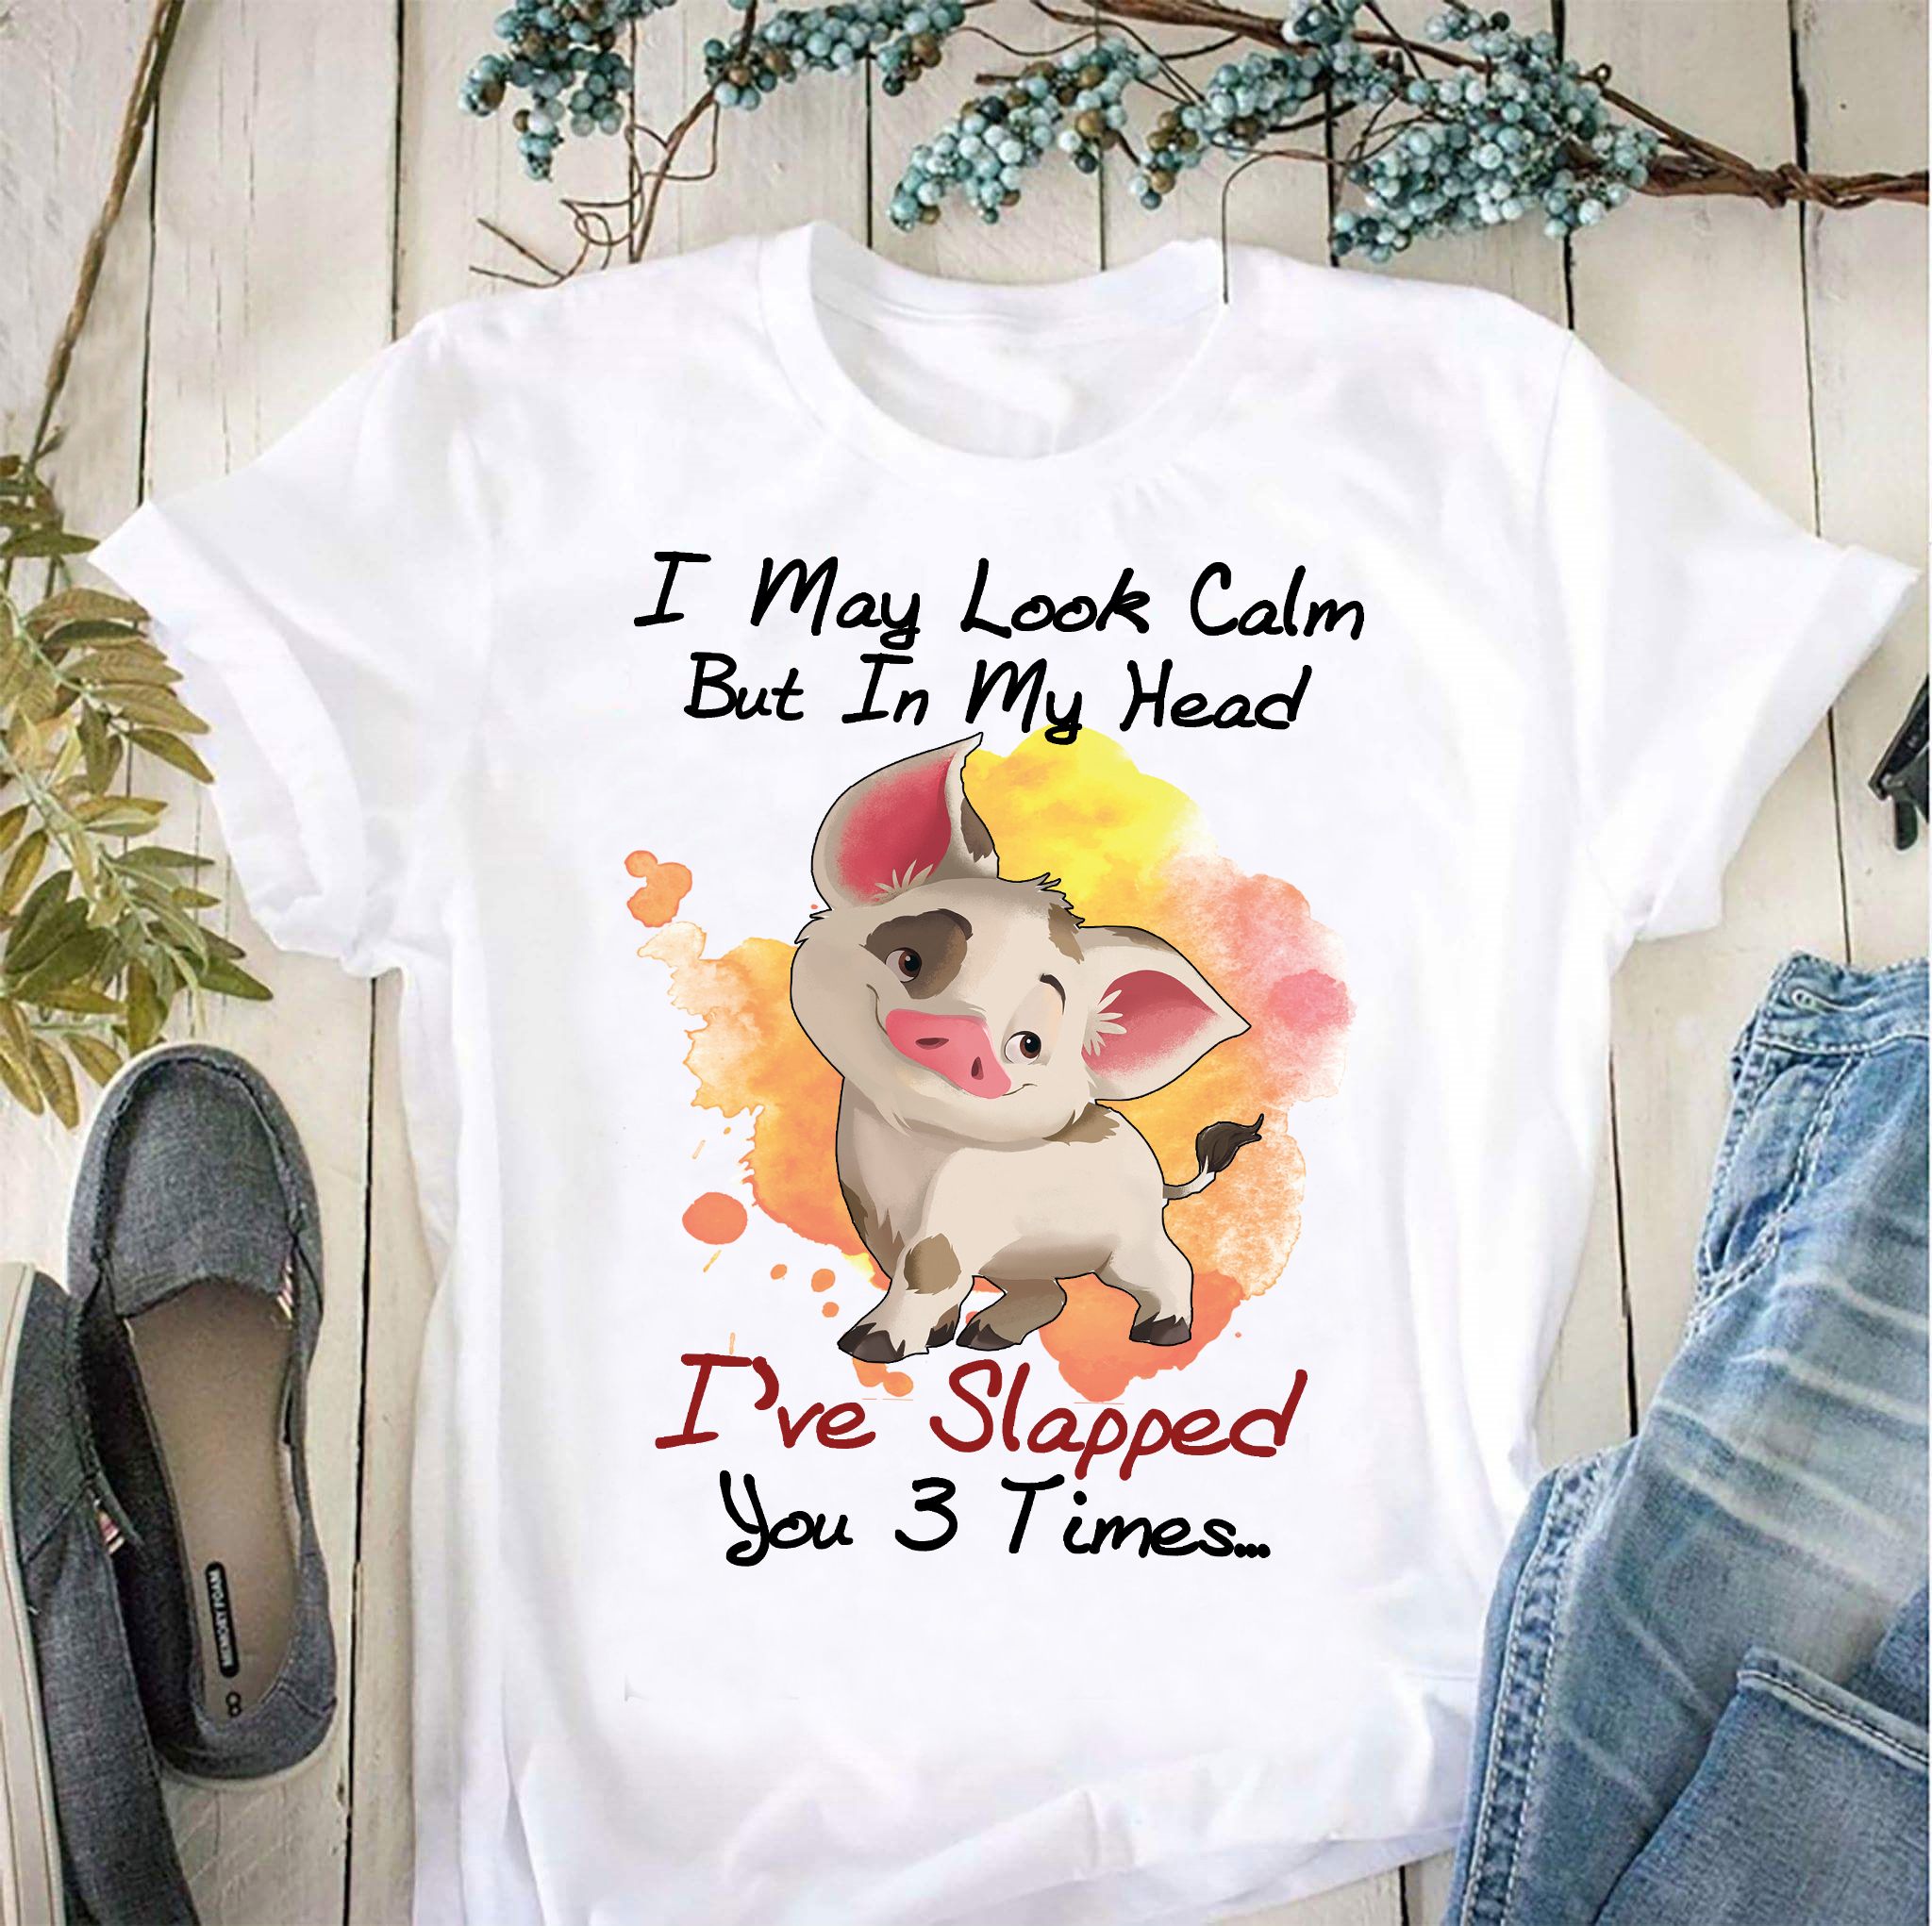 I may look calm but in my head I've slapped you 3 times - Pig lovers